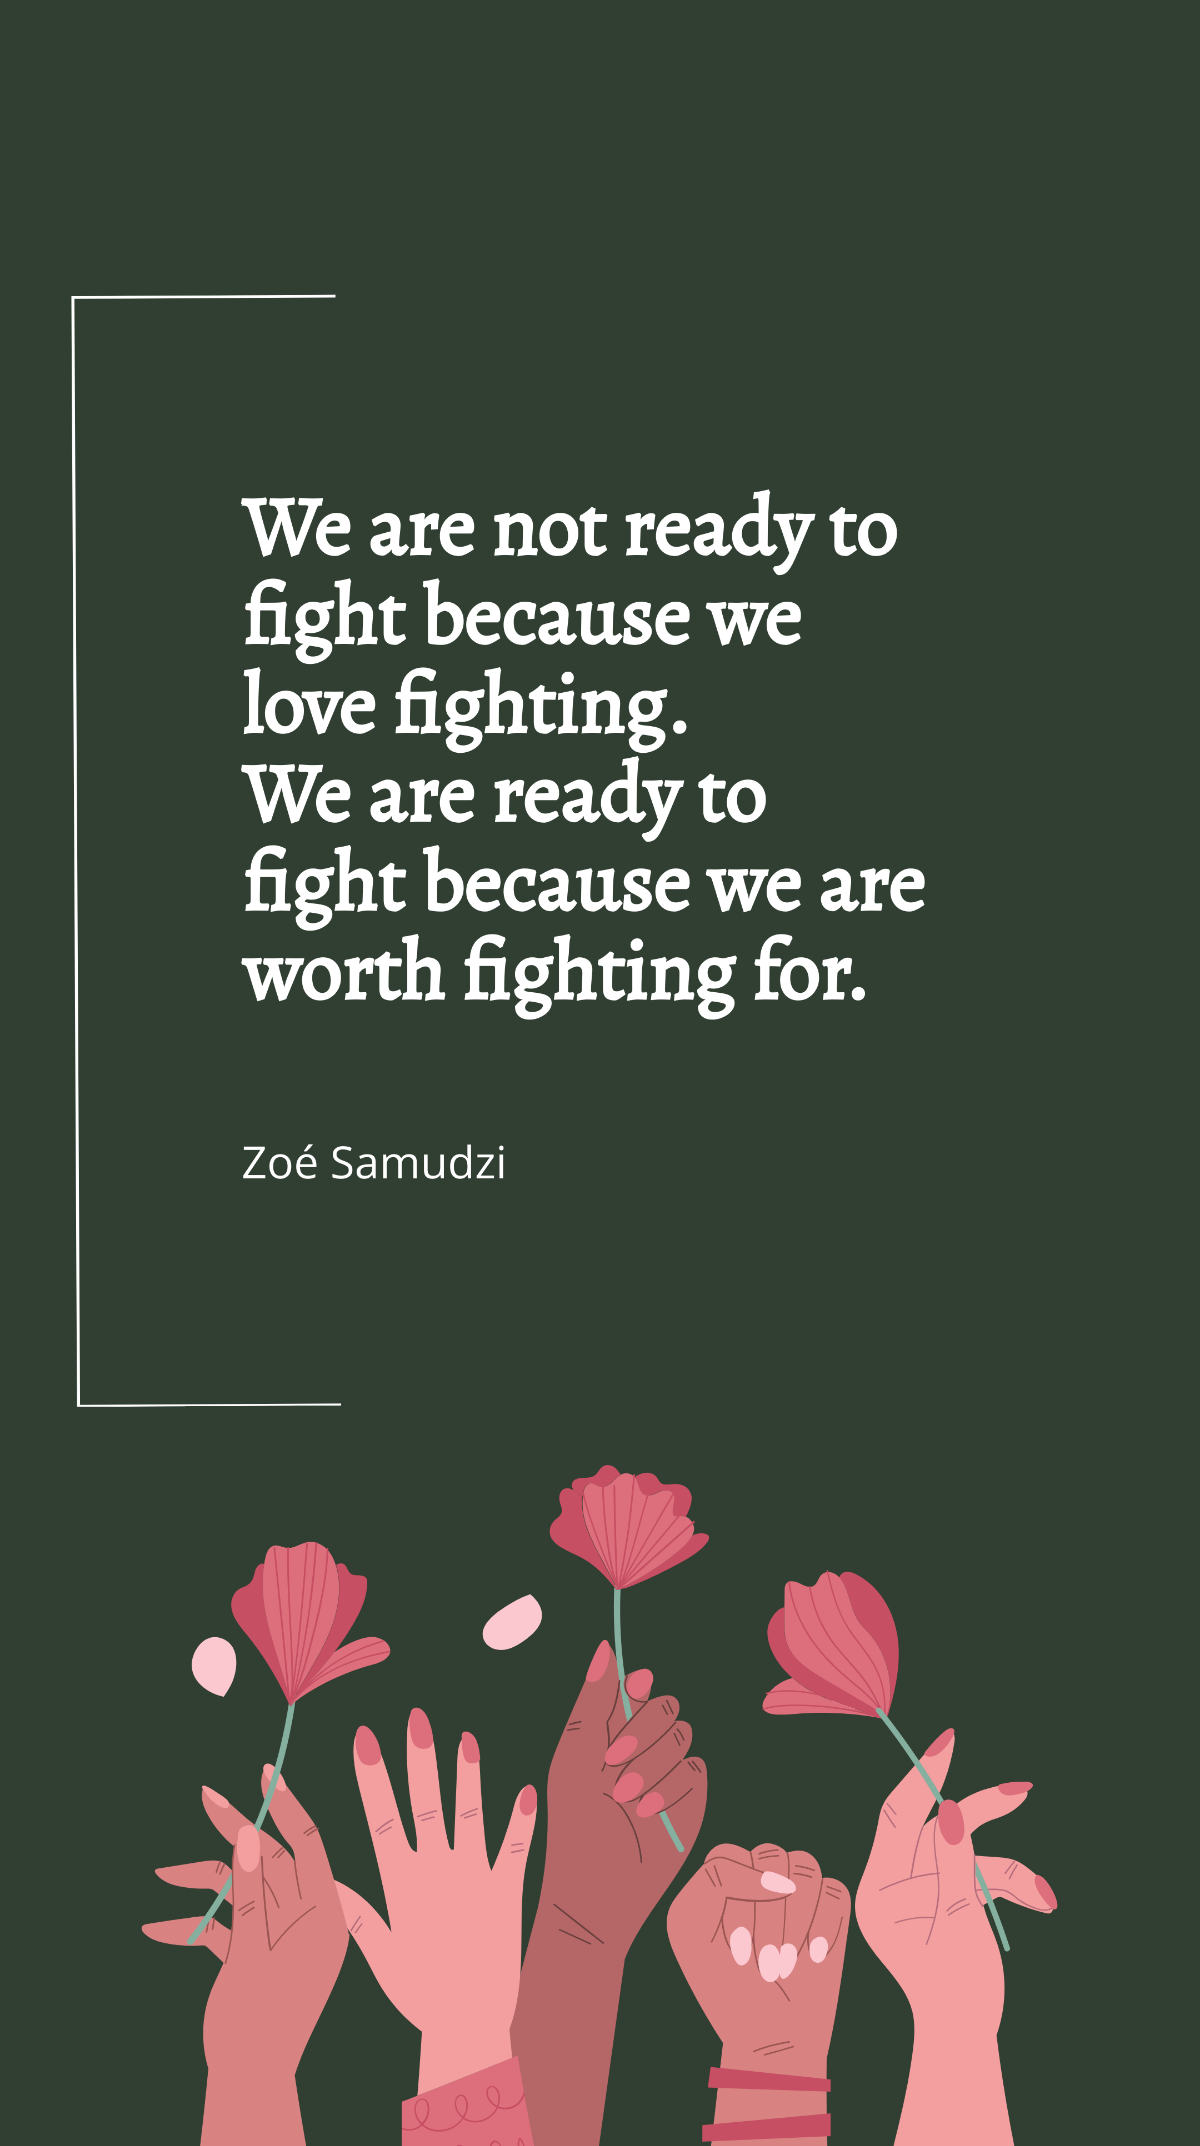 Zoé Samudzi - We are not ready to fight because we love fighting. We are ready to fight because we are worth fighting for.